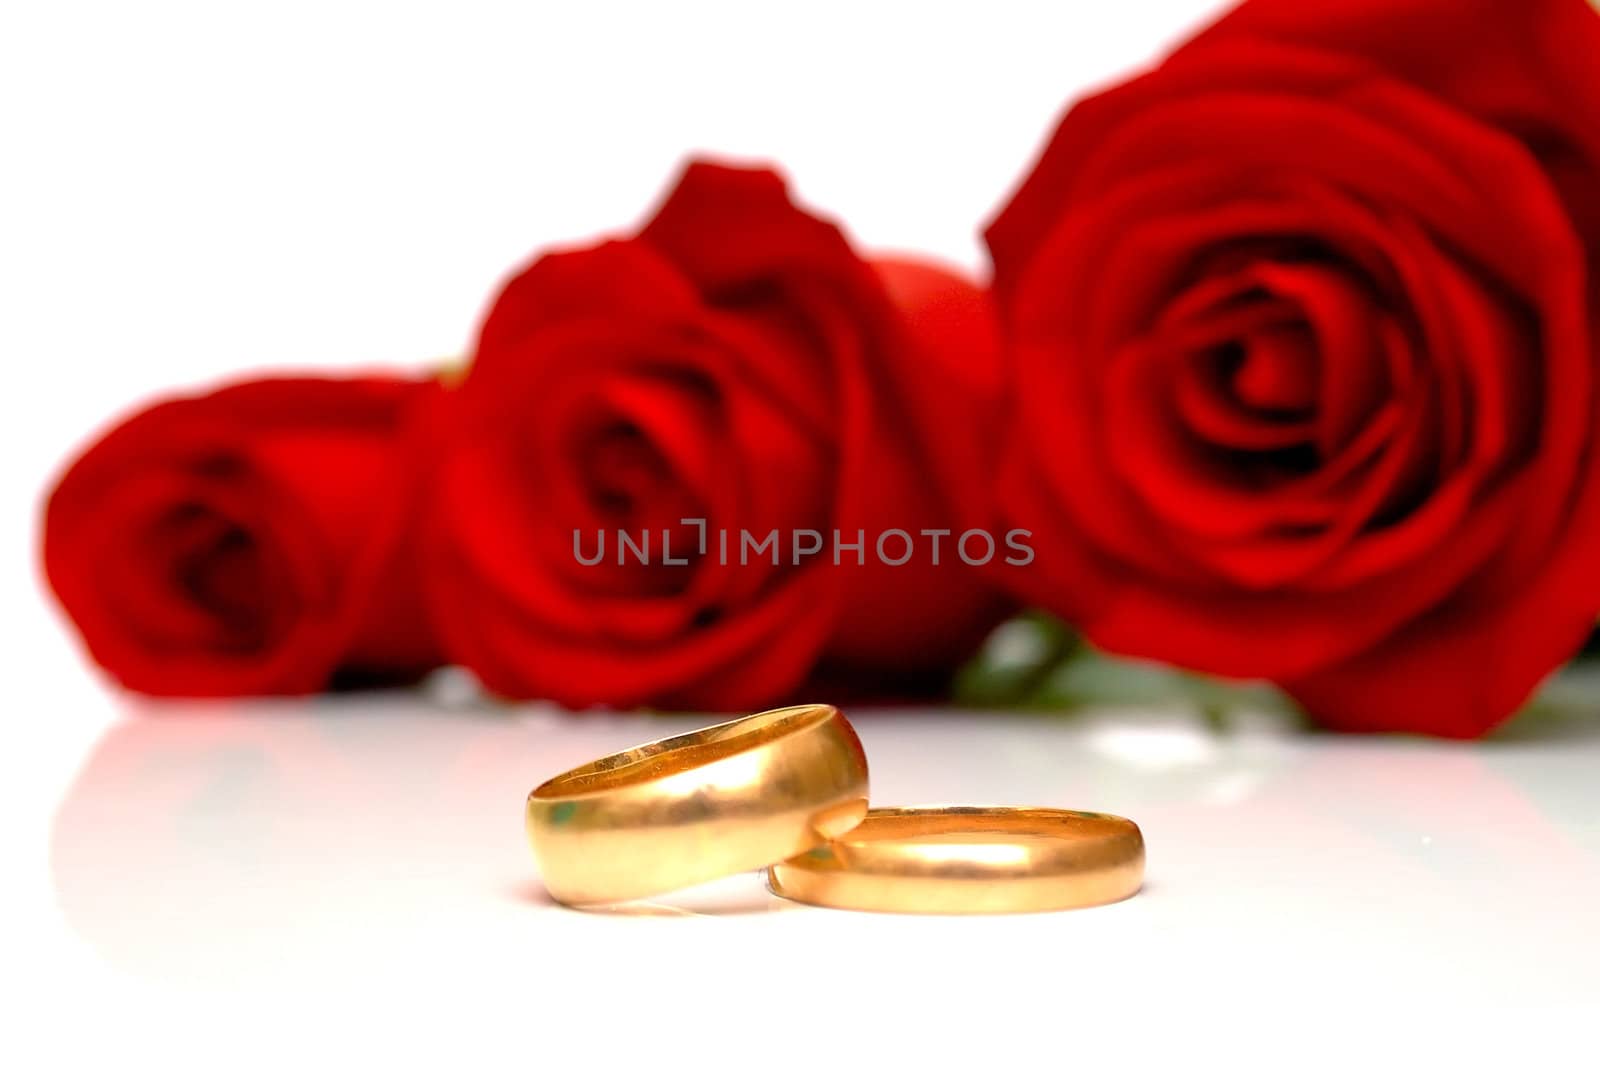 Wedding rings and red roses on white background